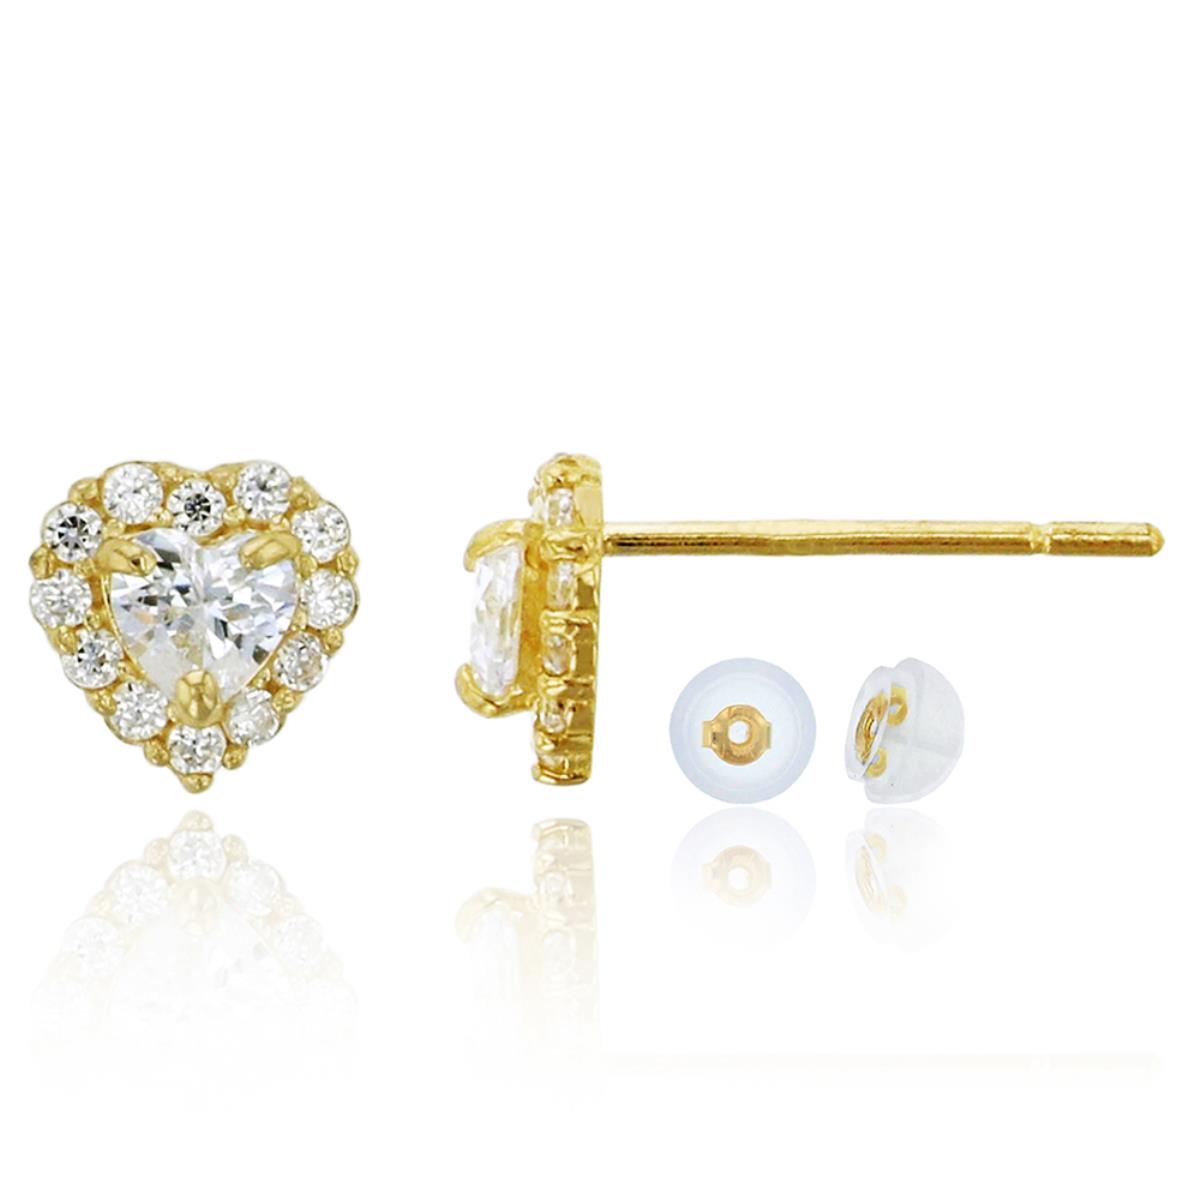 10K Yellow Gold Pave 3X3mm Heart Halo Stud Earring with Bubble Silicone Back